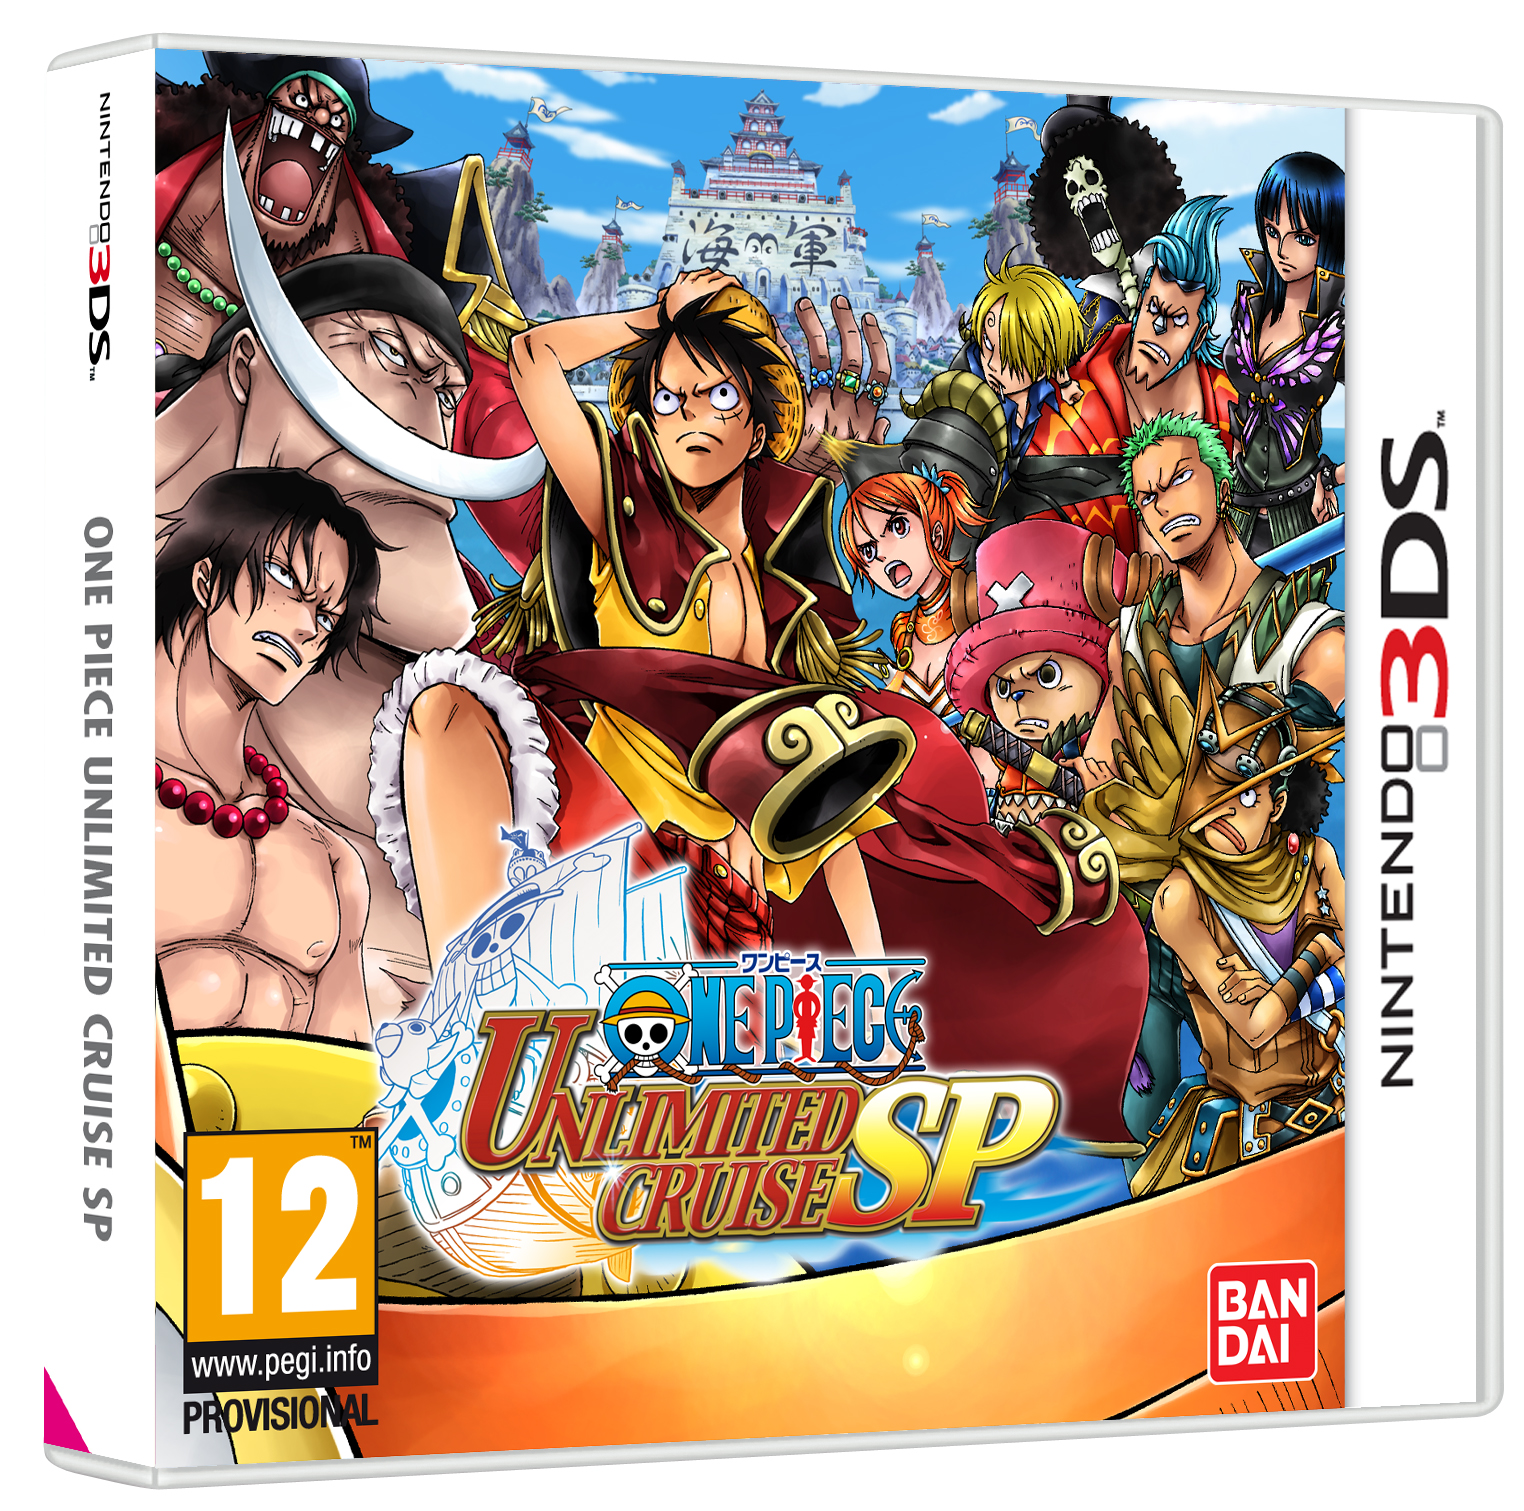 One Piece Unlimited Cruise Special box art